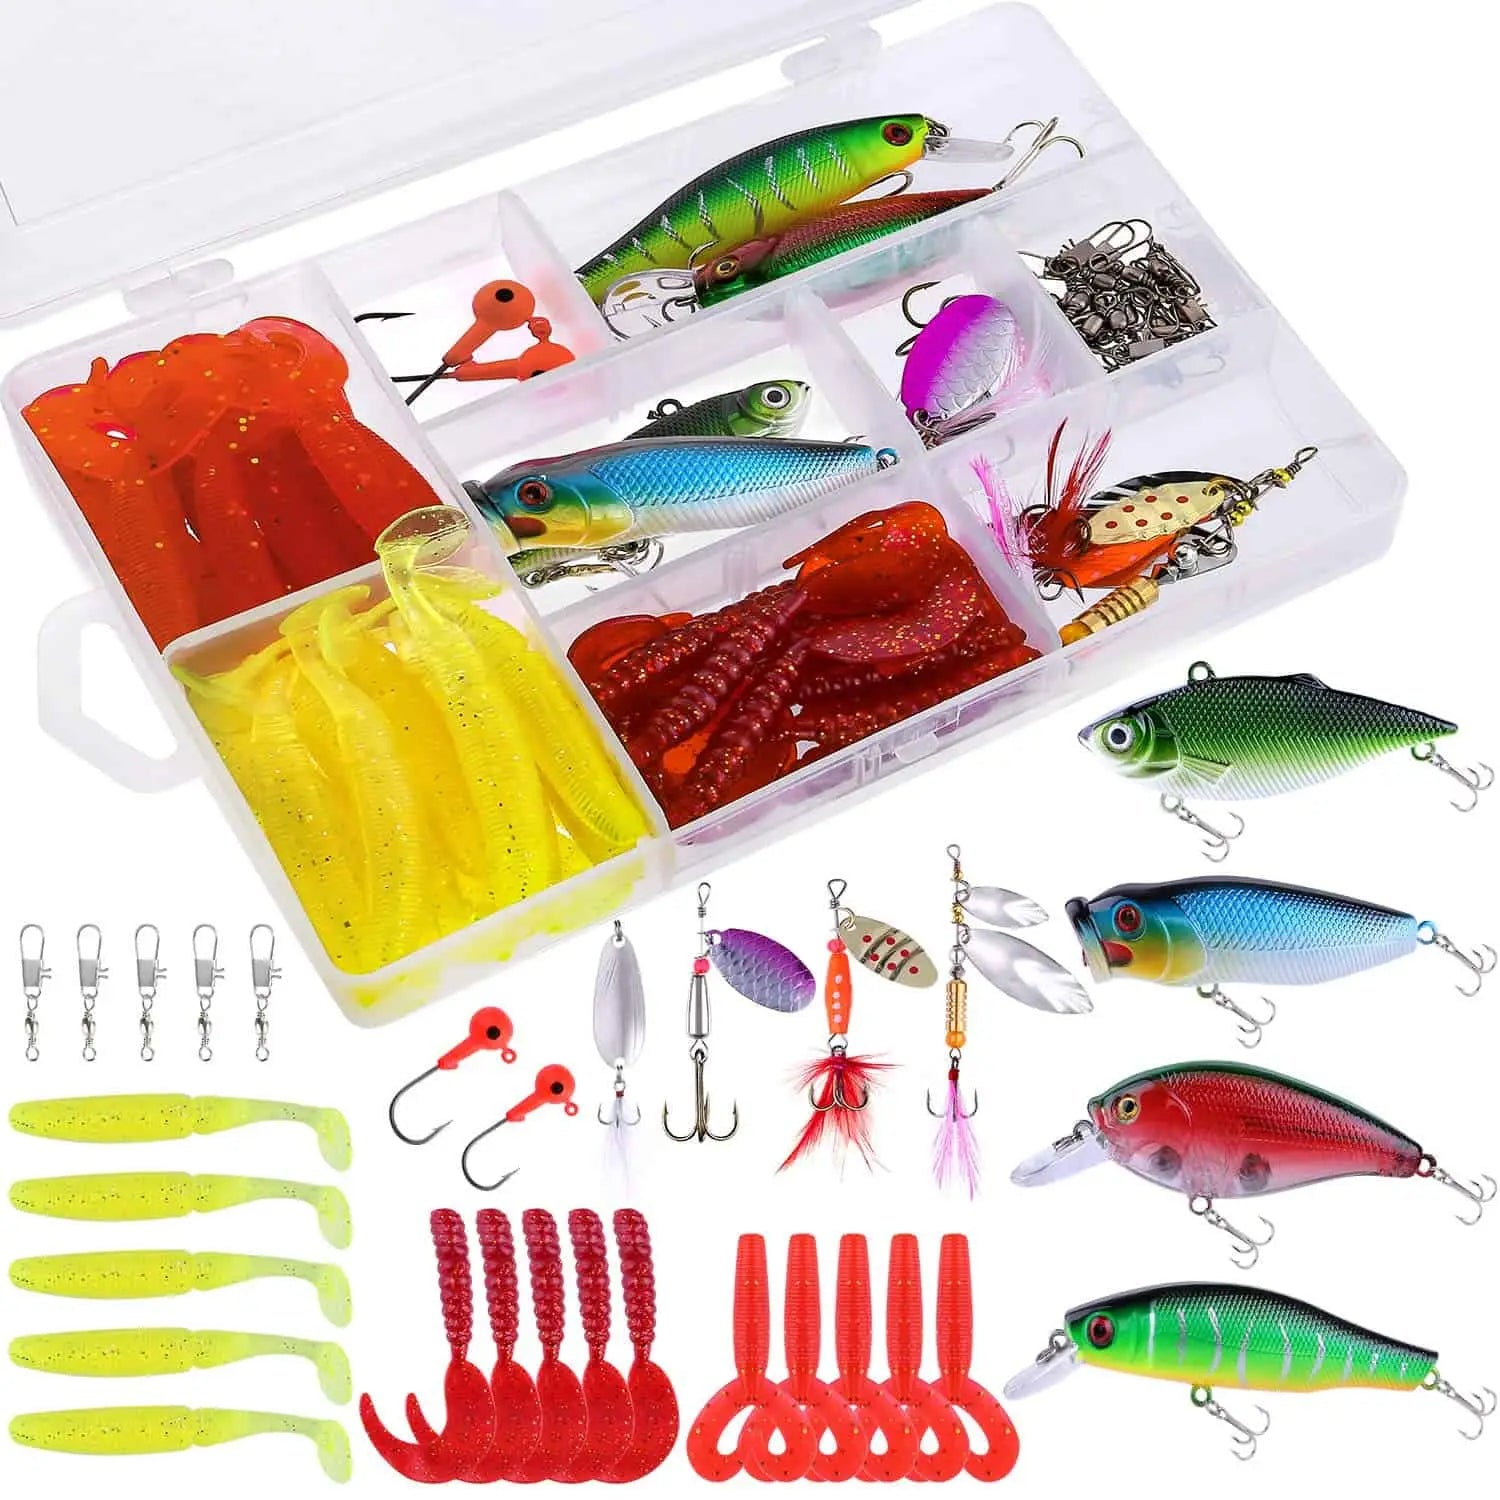  ifundom 150pcs Artificial Bait Fishing Lures Children's Toys  Childrens Toys Sour Worms Lifelike Red Worms Freshwater Fish Lures  Freshwater Fishing Baits Fishing Bait Lures Realistic Worms : Sports &  Outdoors